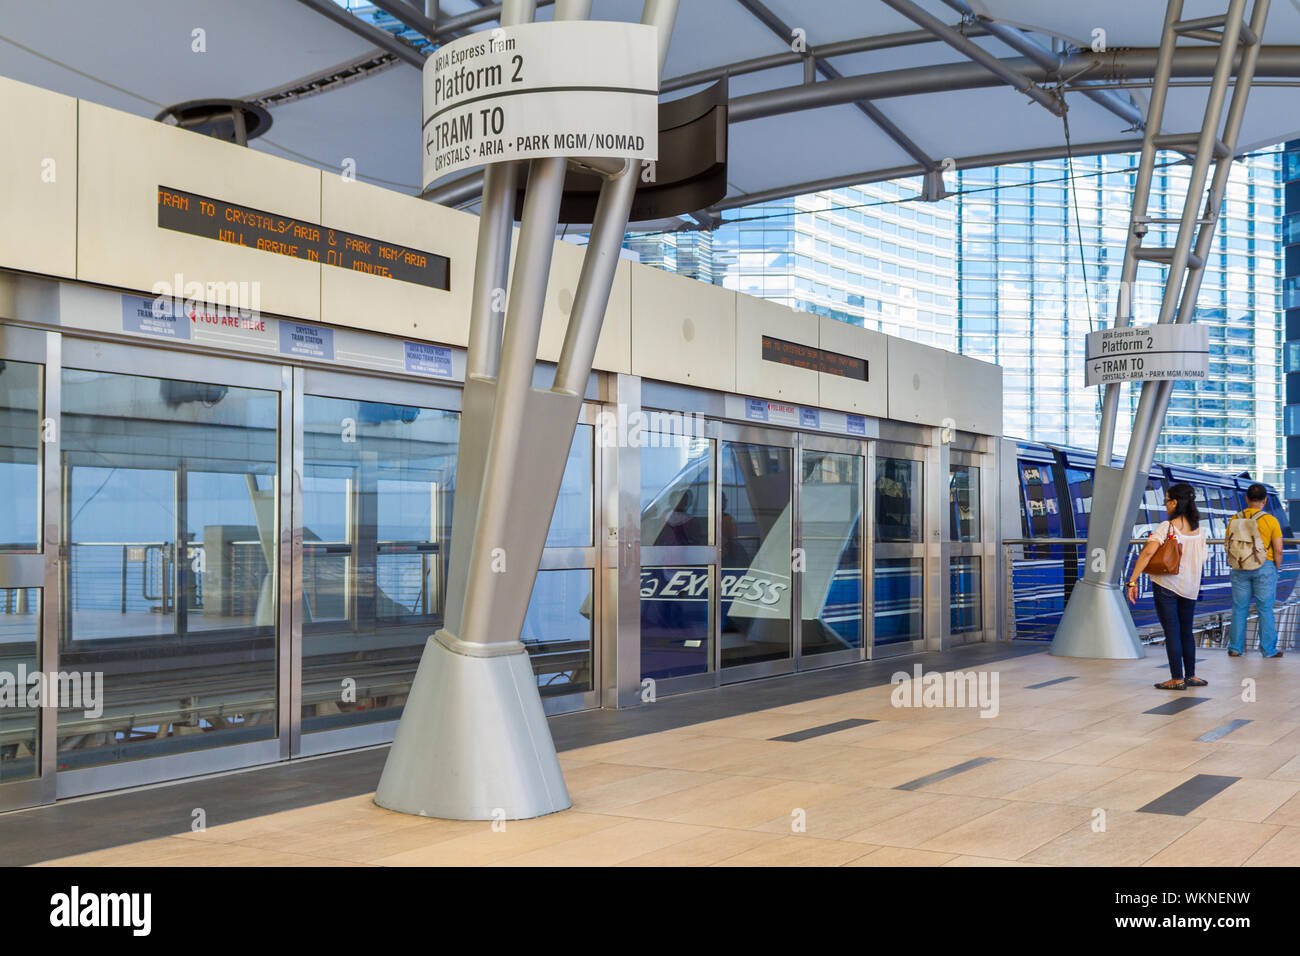 Las Vegas, NV / USA – May 11, 2019: The Aria Express tram offers free service between Park MGM, Aria, and Bellagio hotels on the Las Vegas Strip. Stock Photo